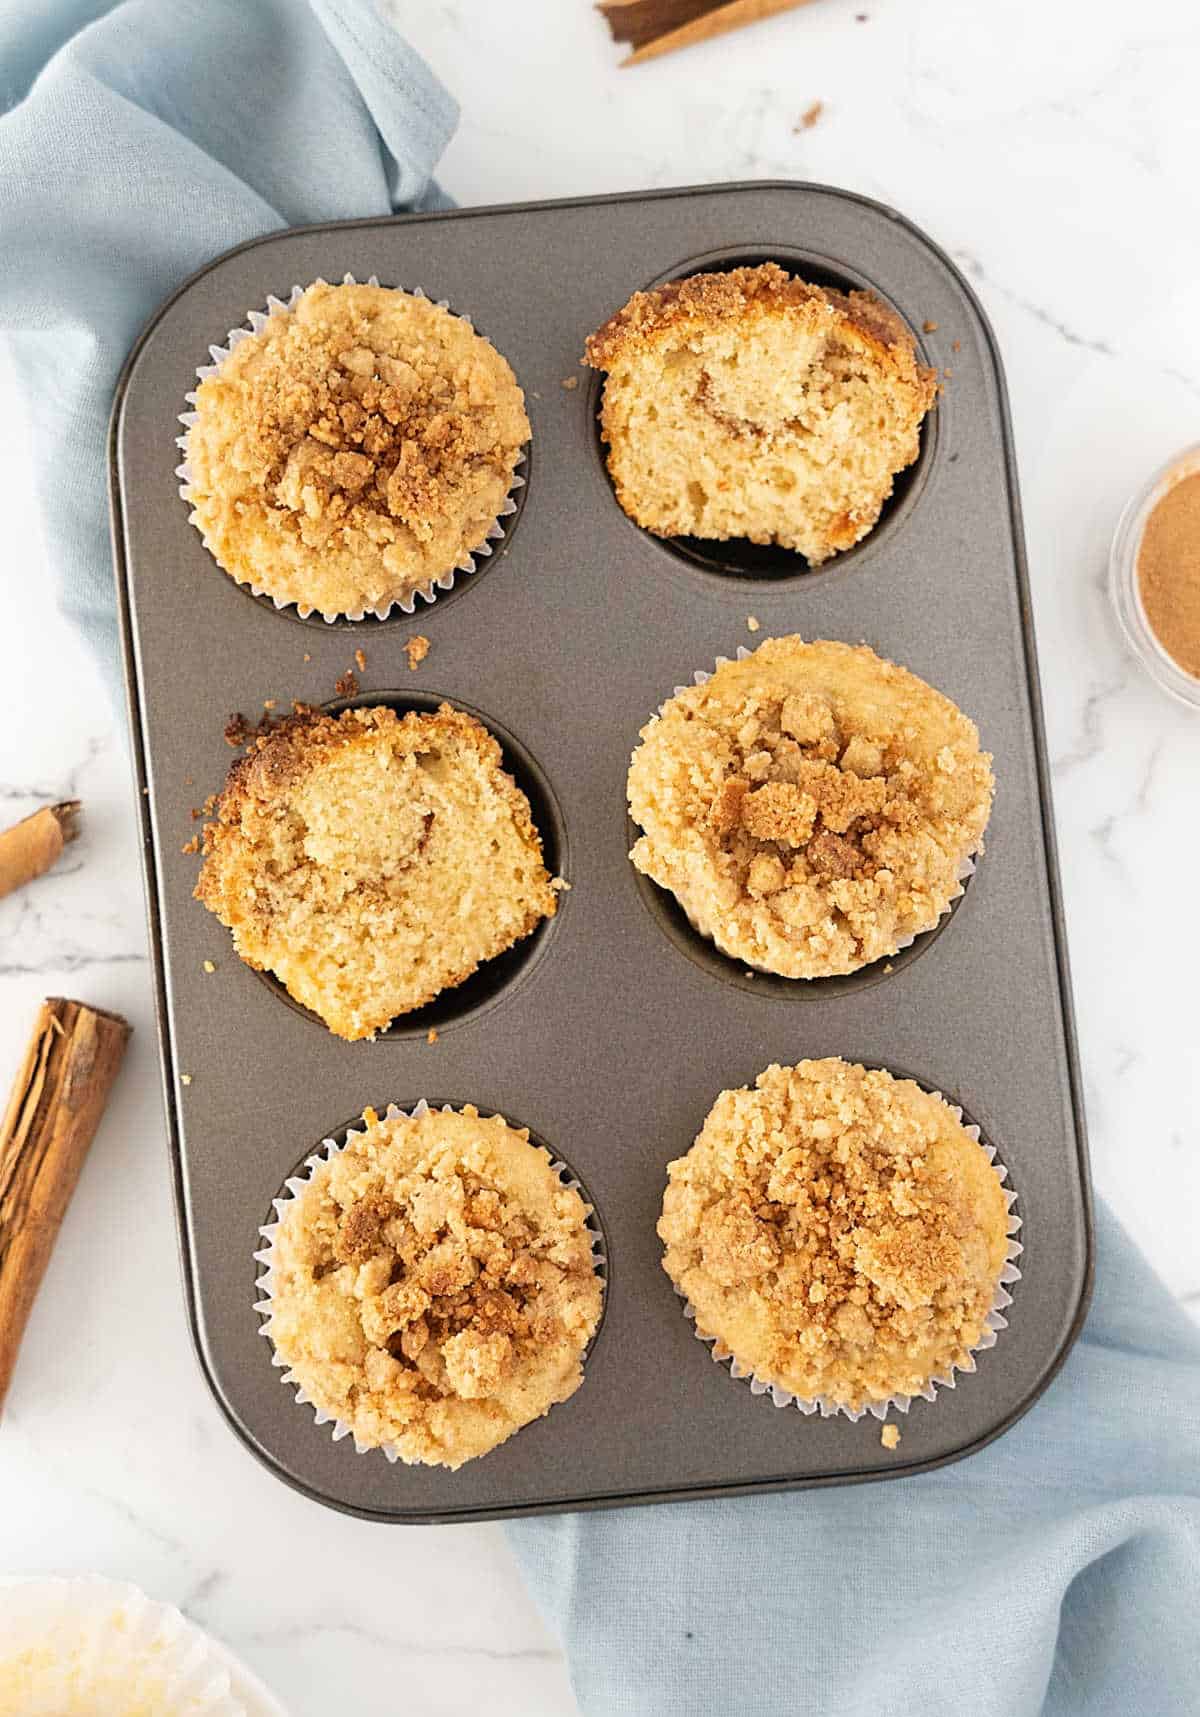 Metal pan with whole and halved cinnamon crumb muffins. Light blue cloth, white marbled surface. 